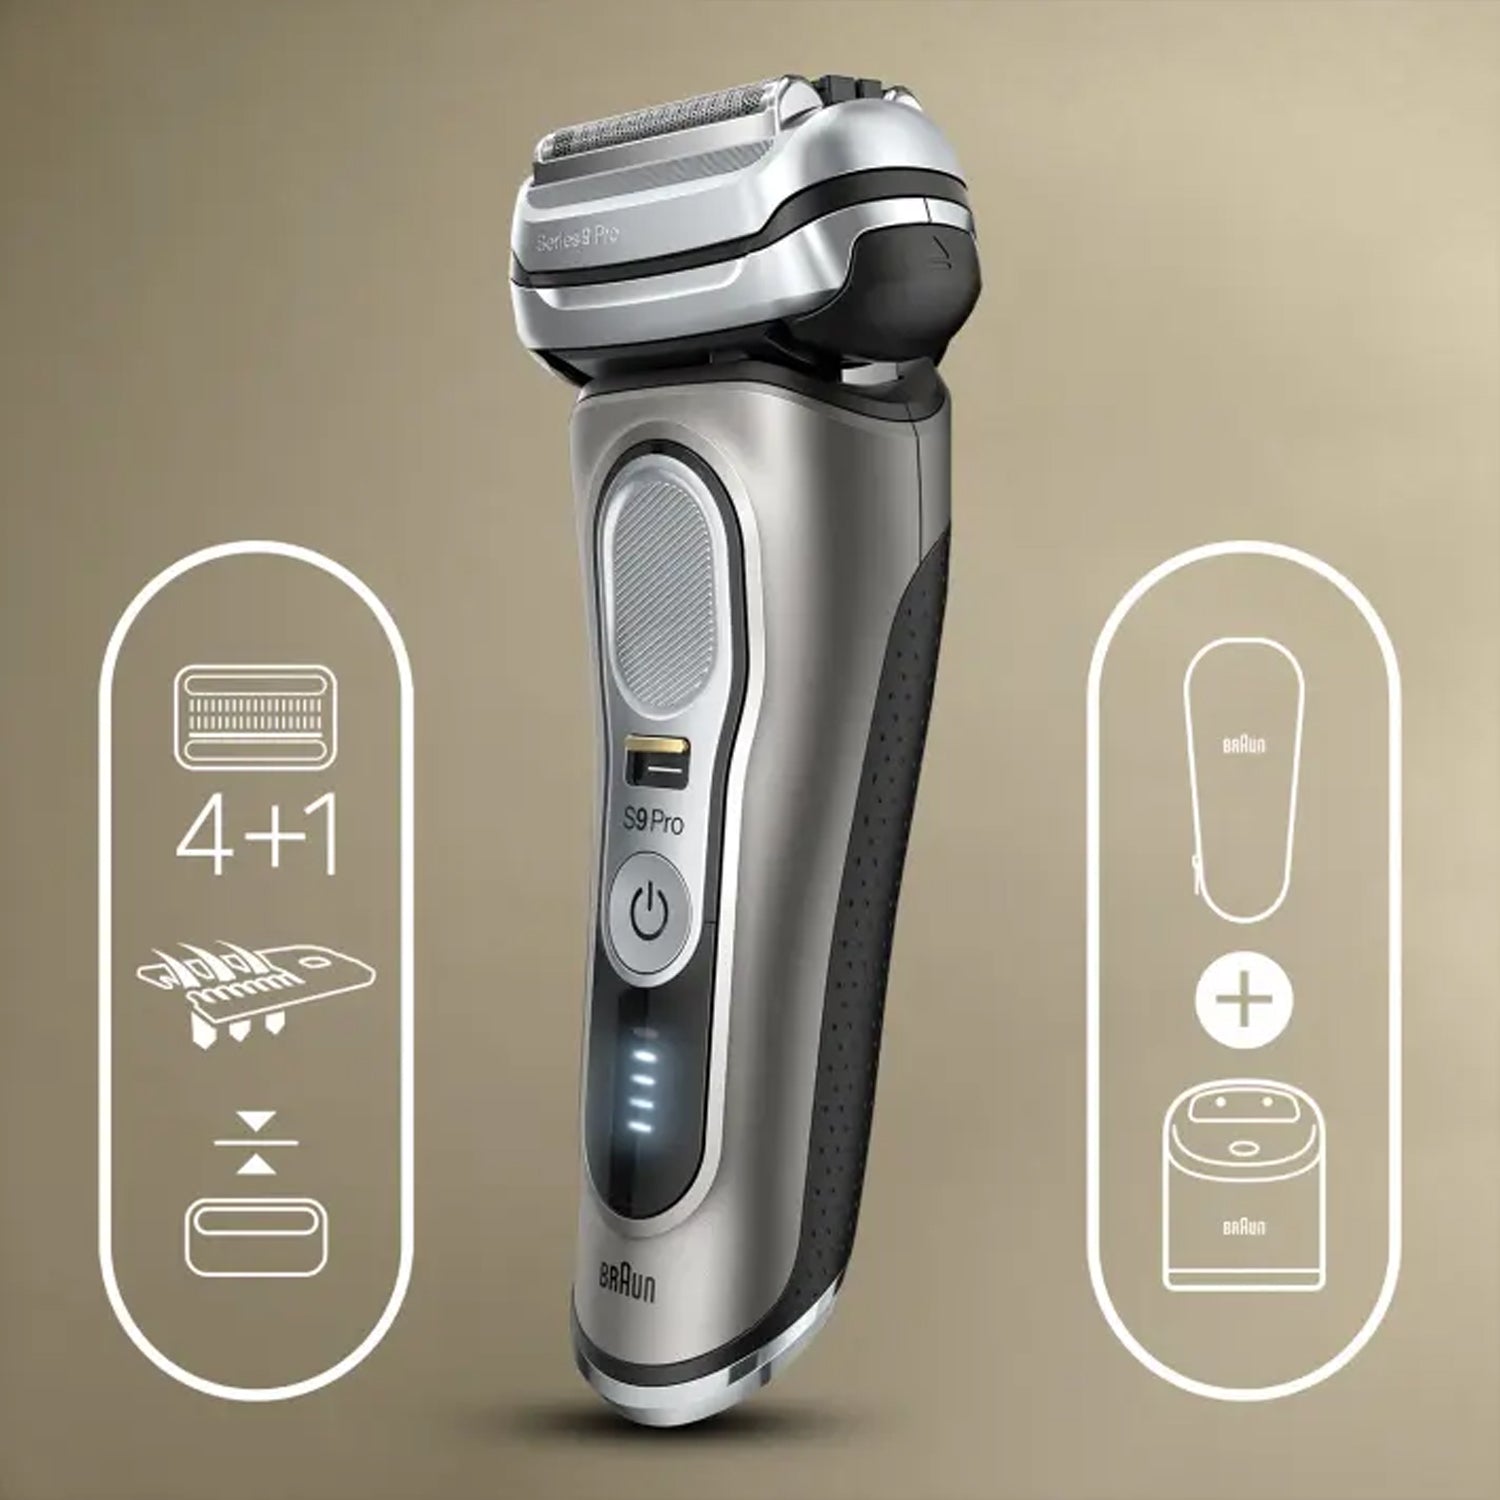 Braun Series 9 Pro 9465cc Wet & Dry Shaver with 5-In-1 SmartCare Center & Travel Case